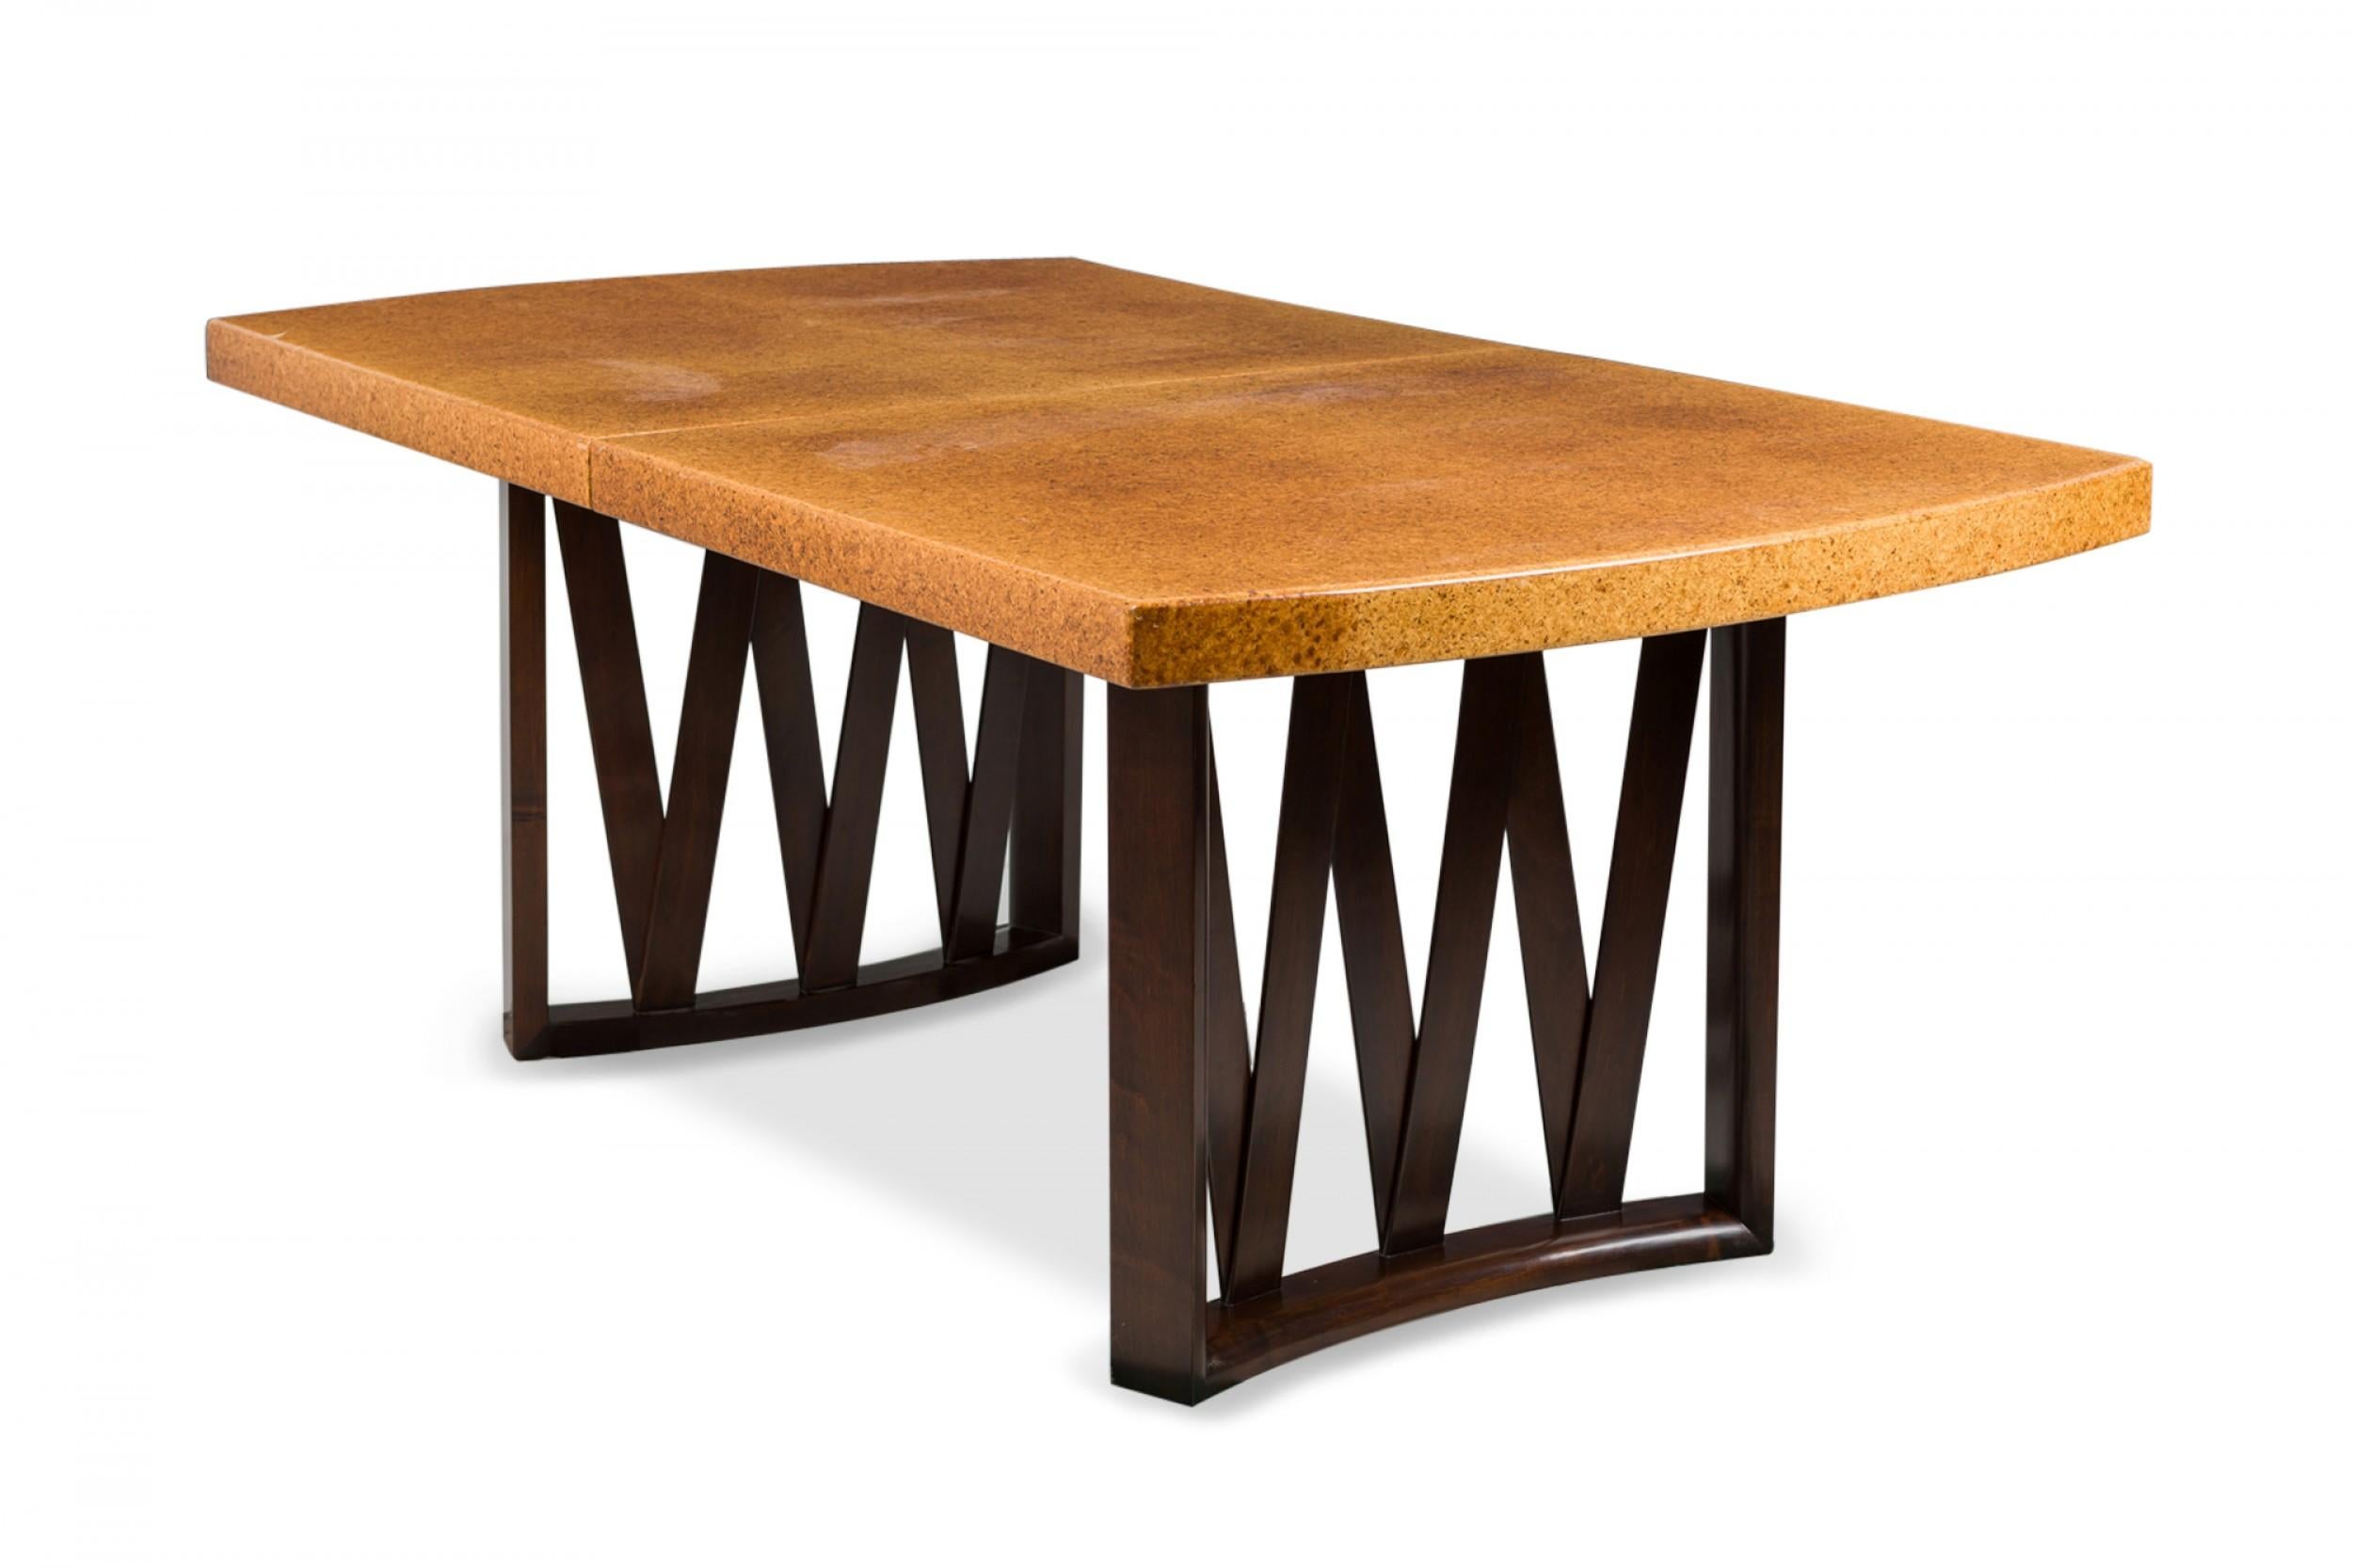 American mid-century dining / conference table with a rounded rectangular cork top with two removable leaves, resting on two dark-stained wooden legs with V-shaped central supports. (Paul Frankl for Johnson Furniture Company).